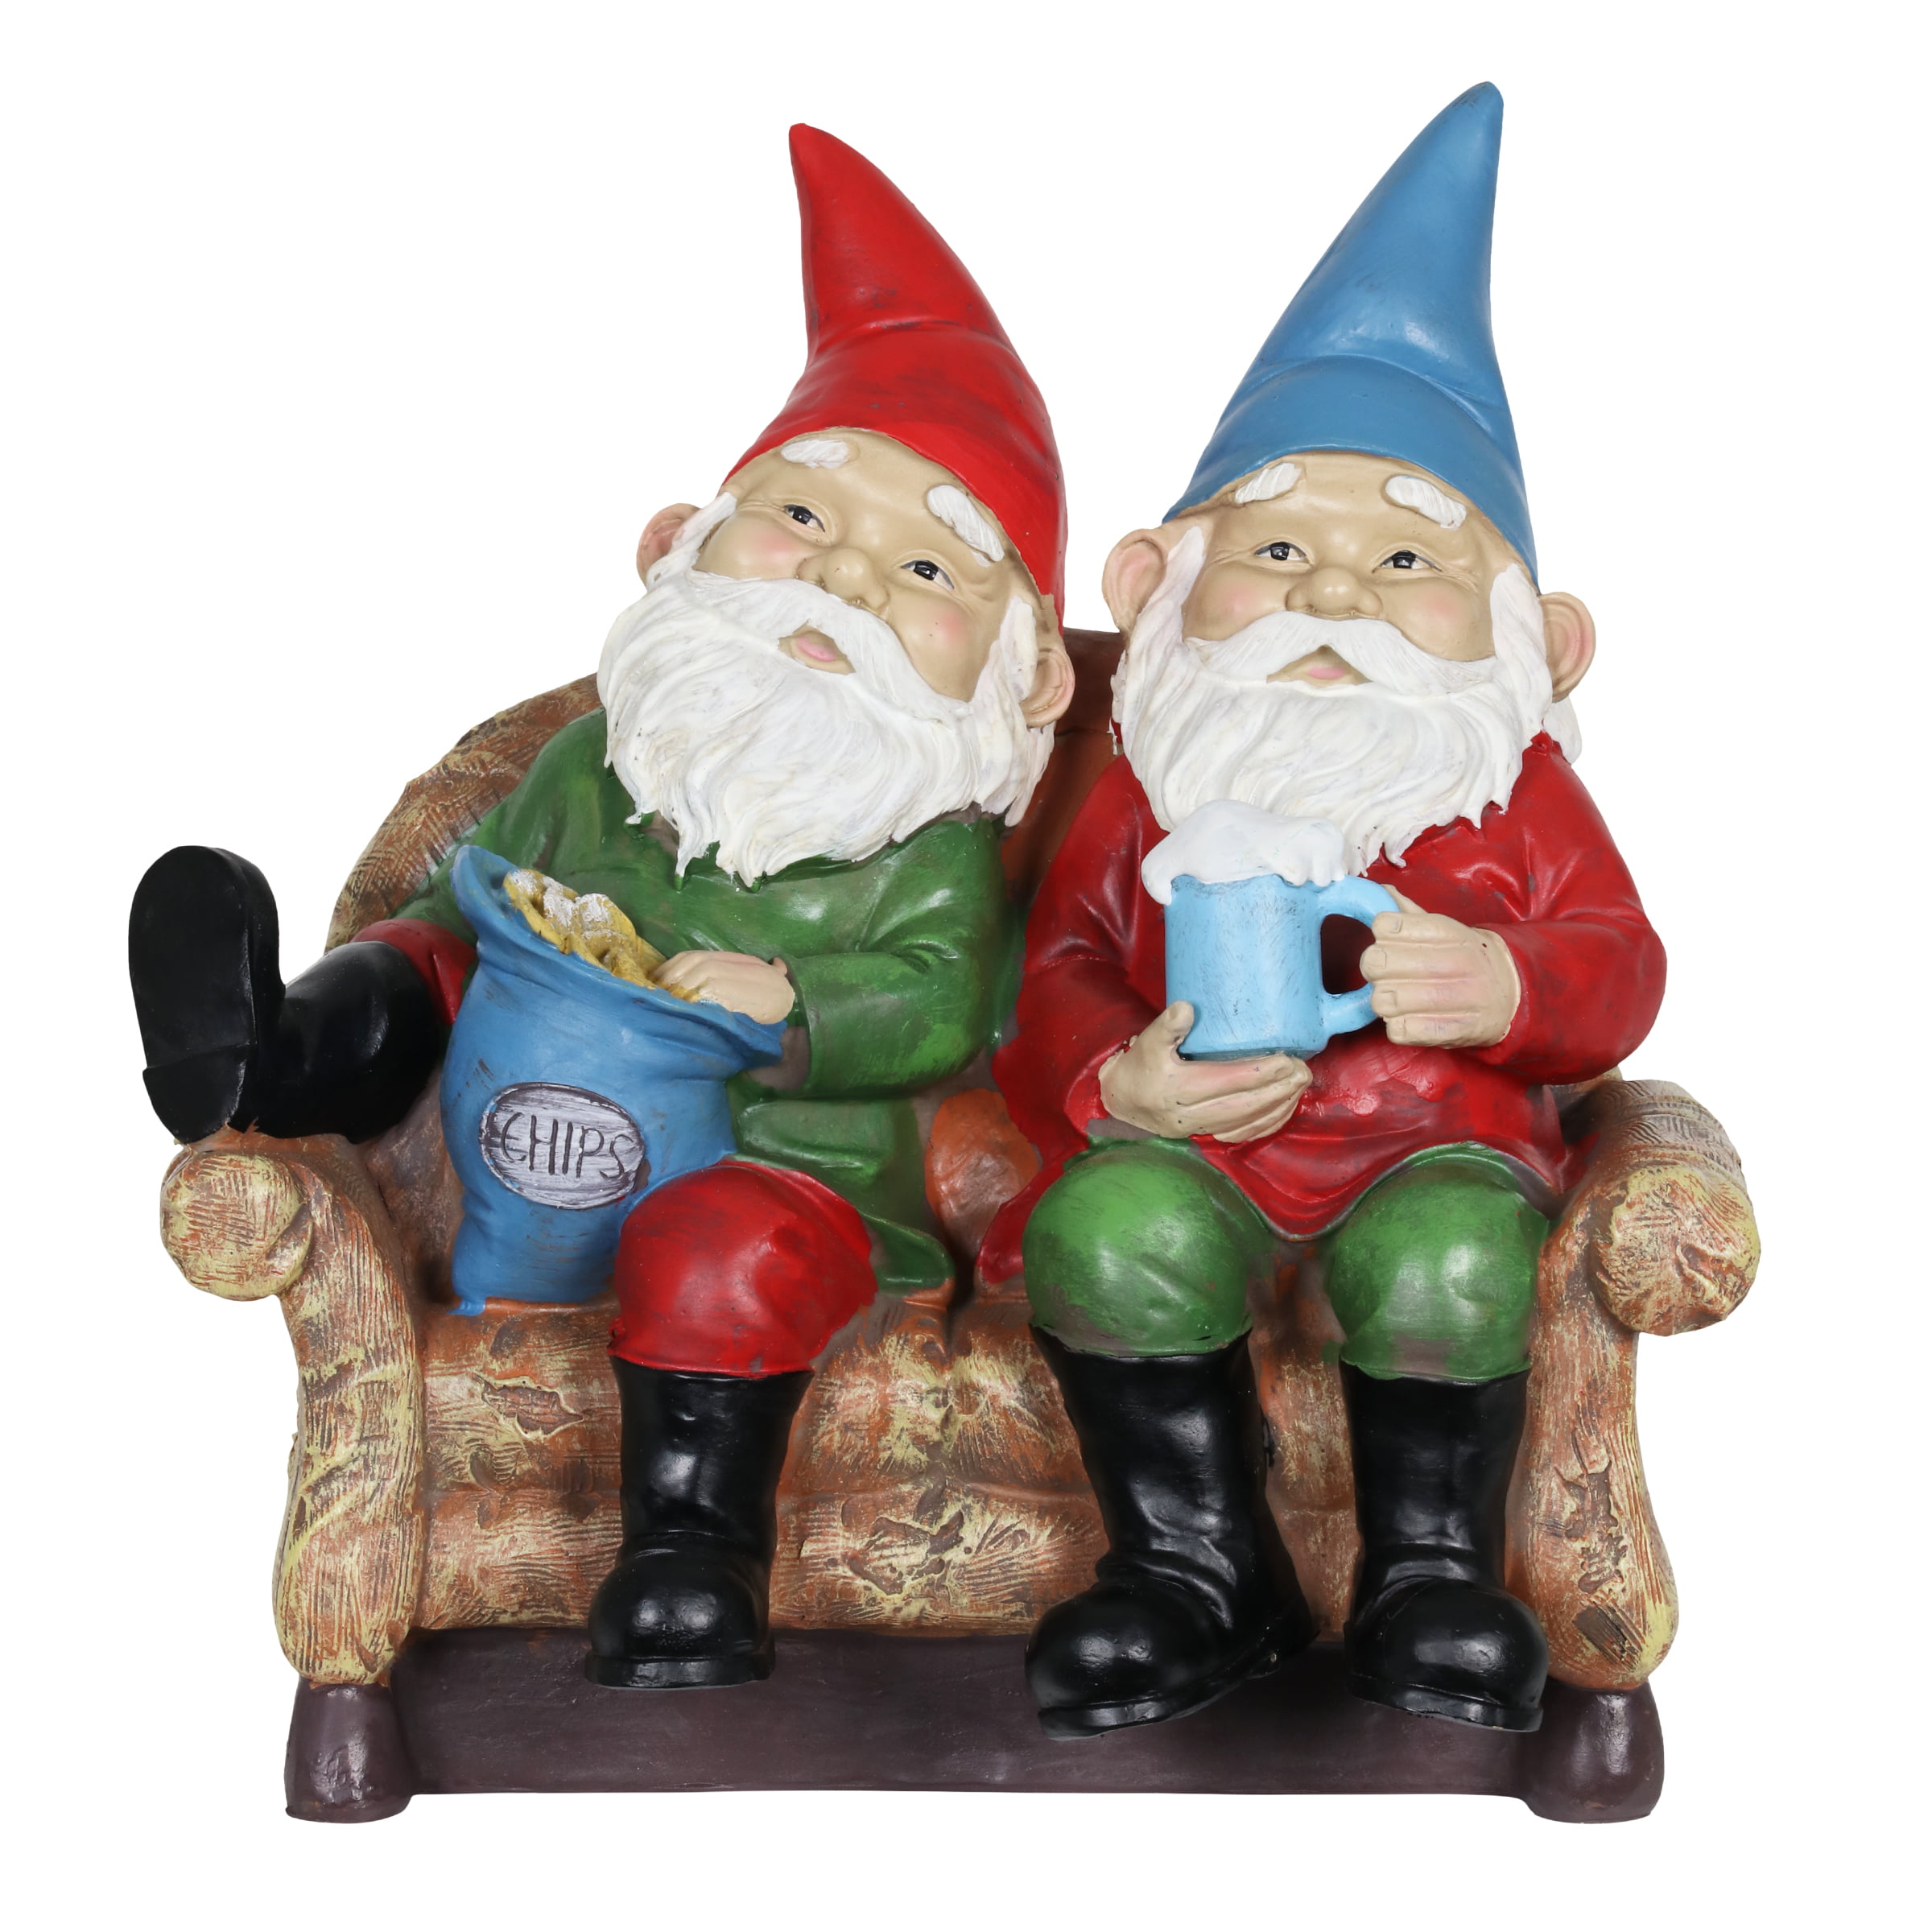 Medium Scale Garden Statue Mr and Mrs Gnome Couple Sculpture Small Polyresin Figurine Indoor Outdoor Yard Lawn Ornament Home Decor 4.5 inches Tall Great for Small Garden or Some Sizes of Fairy Garden 